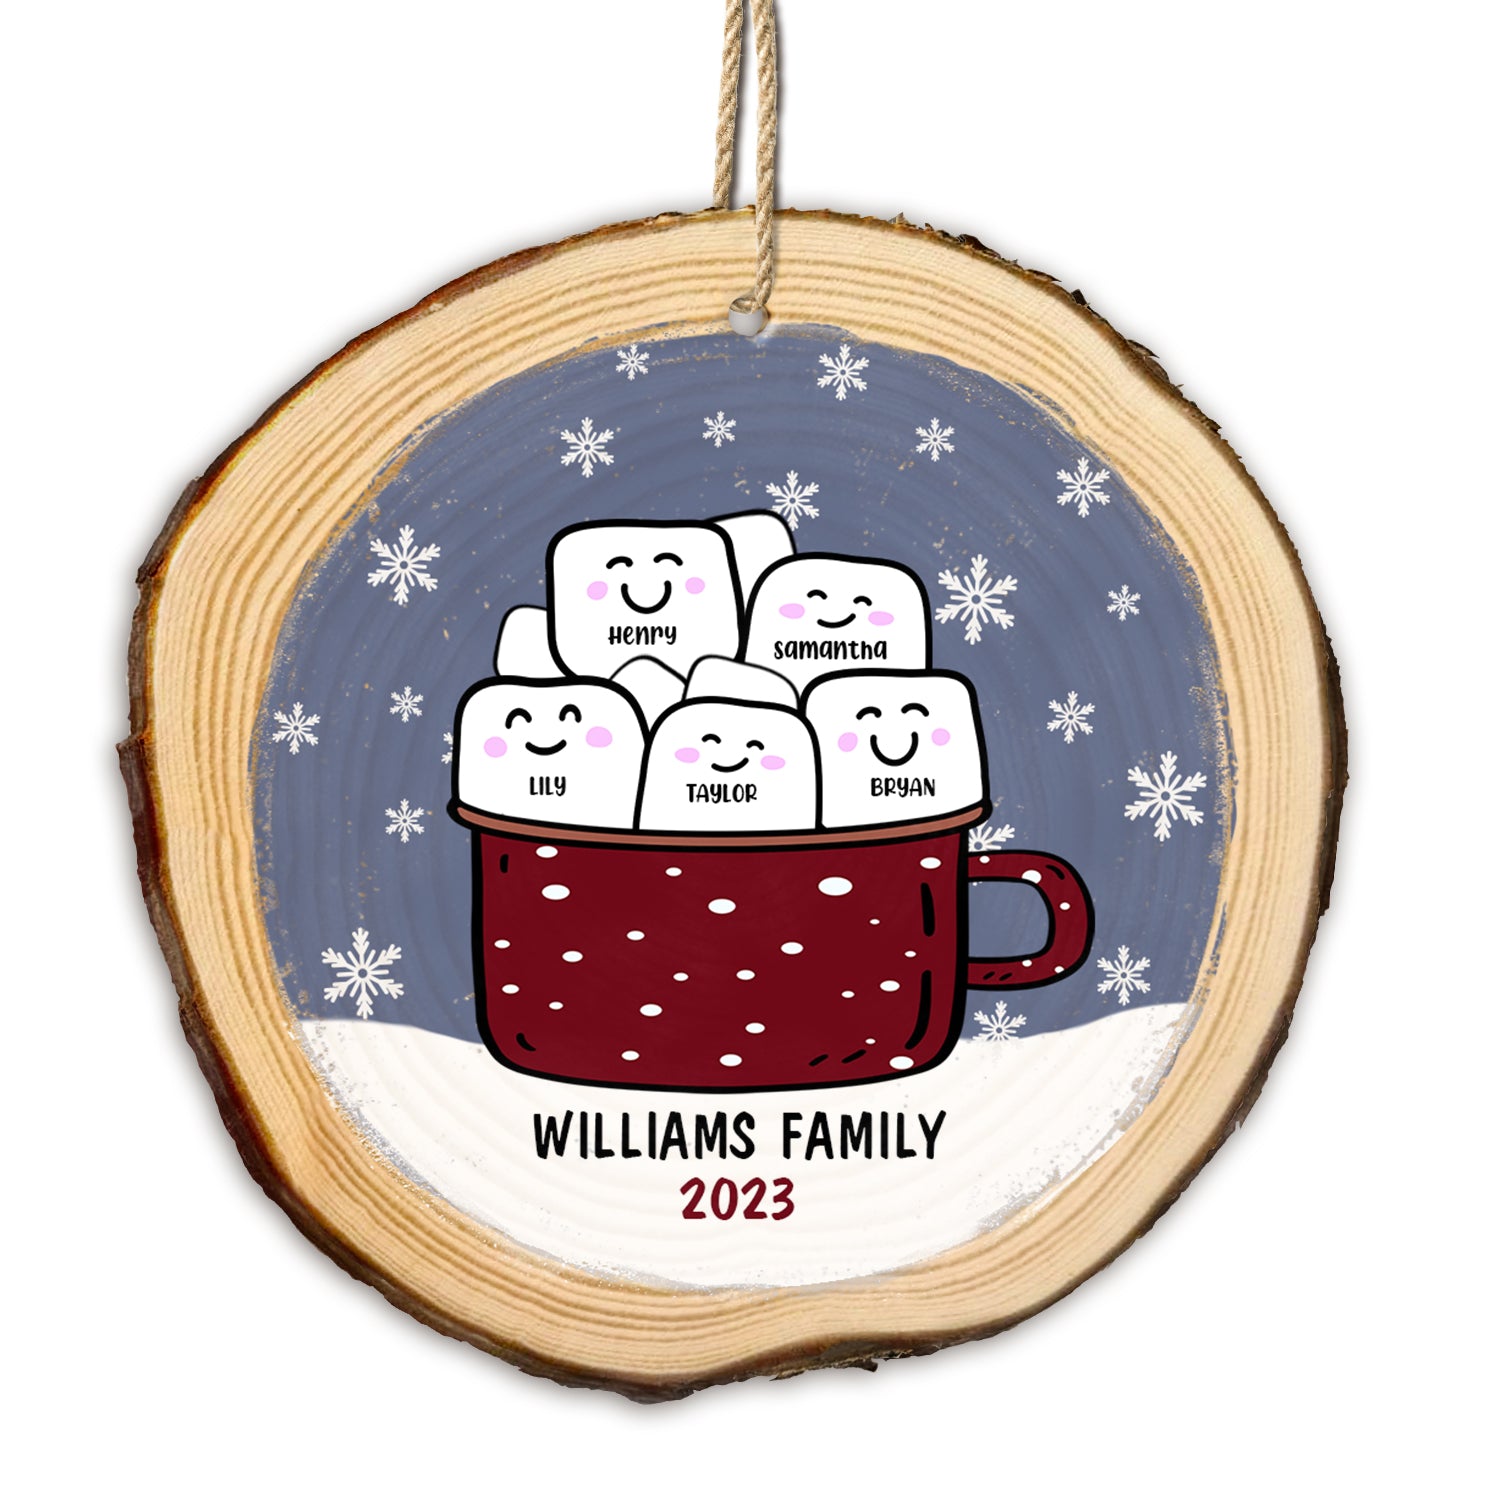 Marshmallow Hot Cocoa Cup - Christmas Gift For Family - Personalized Wood Slice Ornament